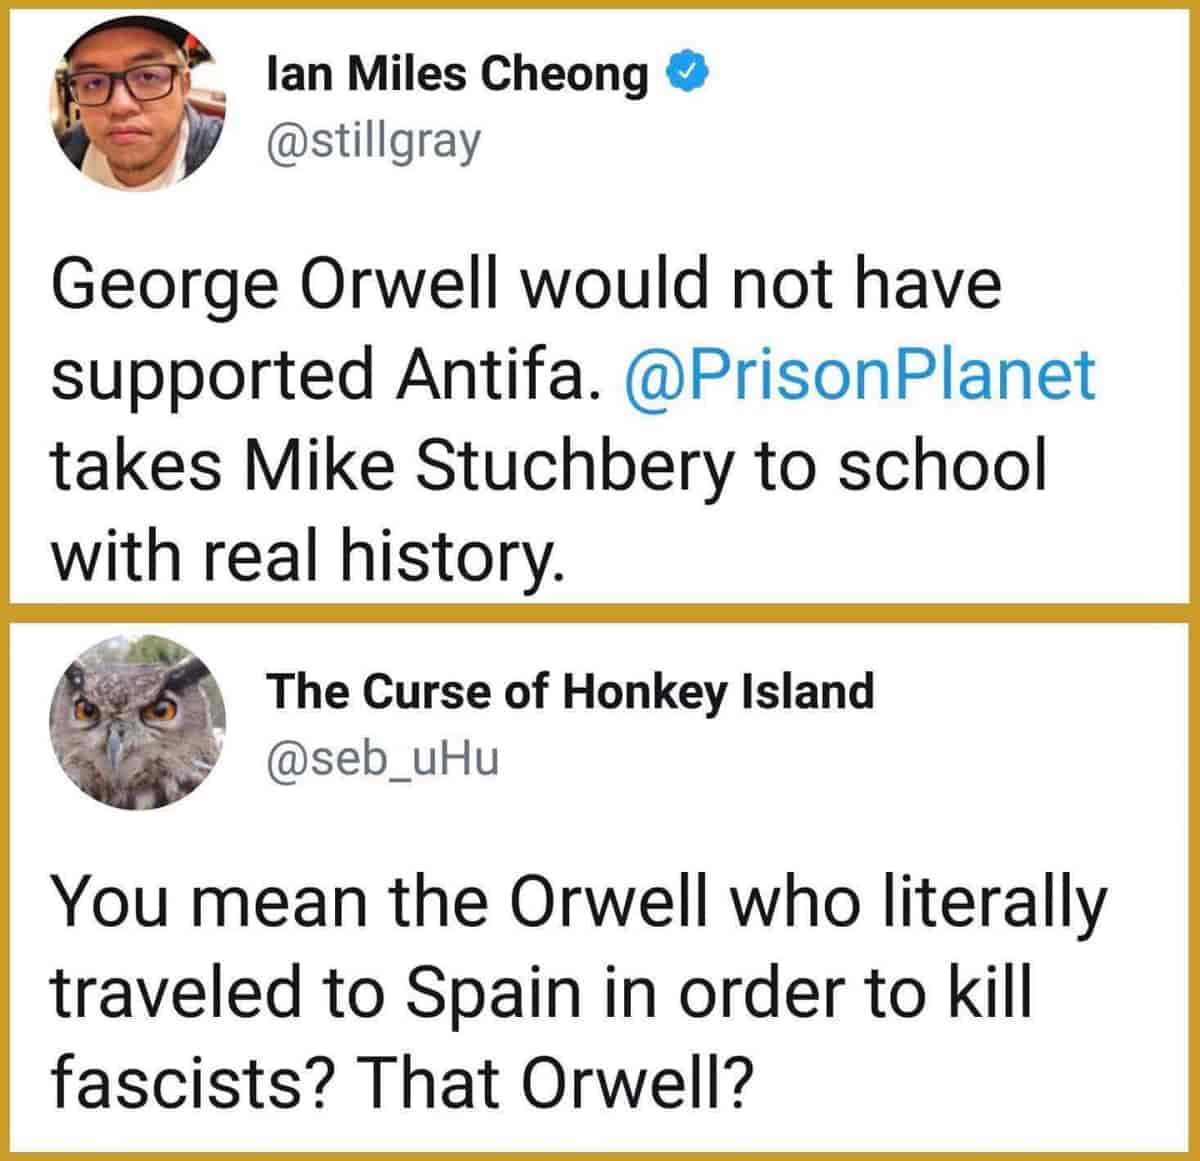 &quot;Orwell would not have supported Antifa&quot;